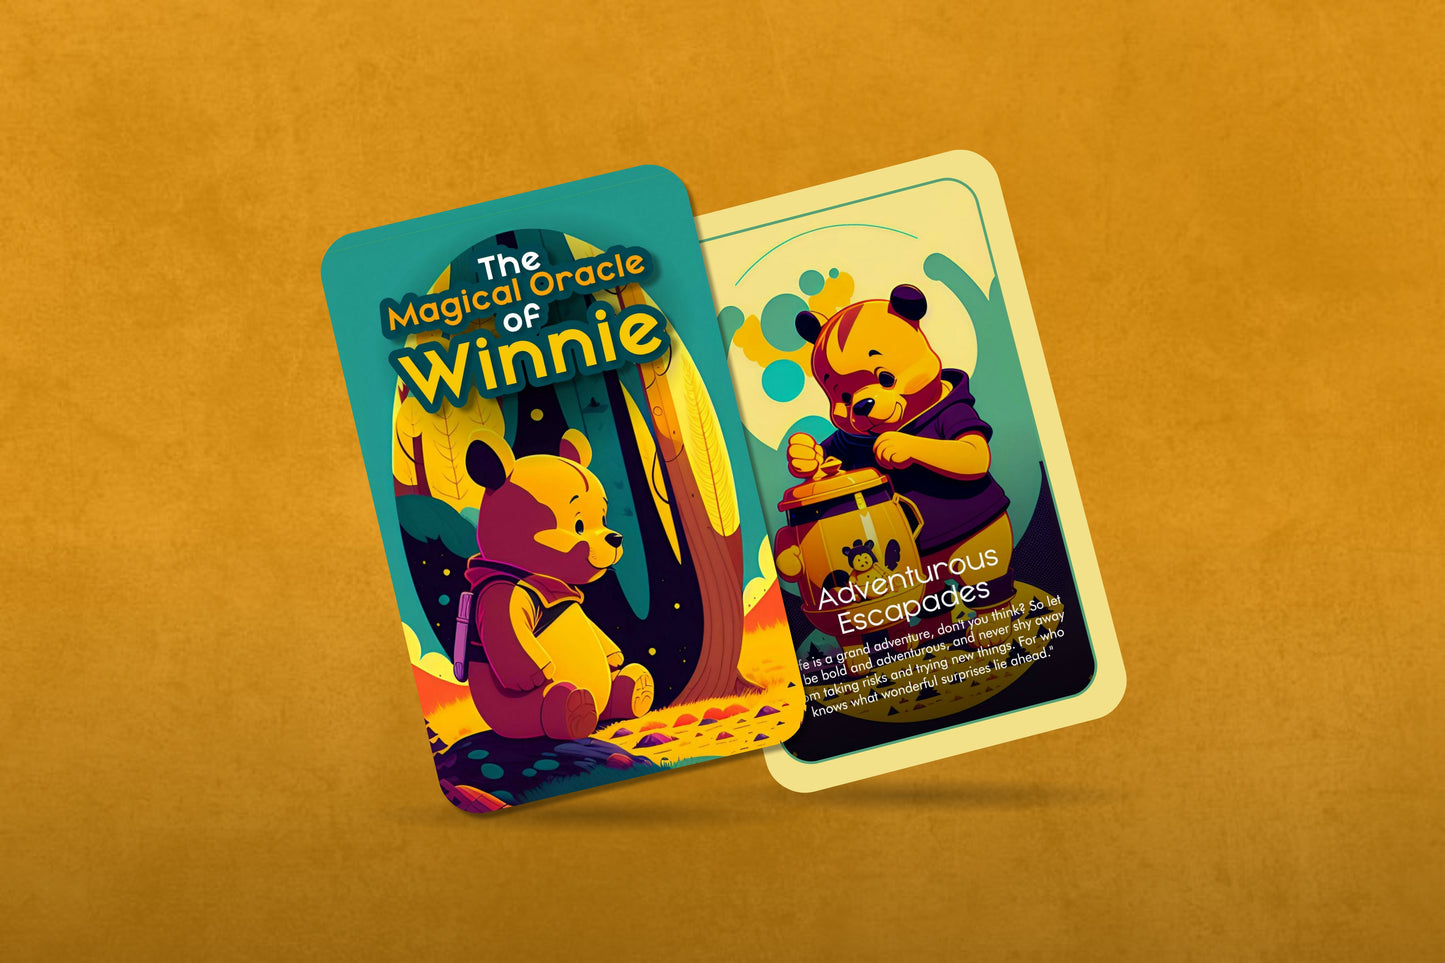 The Magical Oracle of Winnie - Oracle cards - The Oracle of Pooh